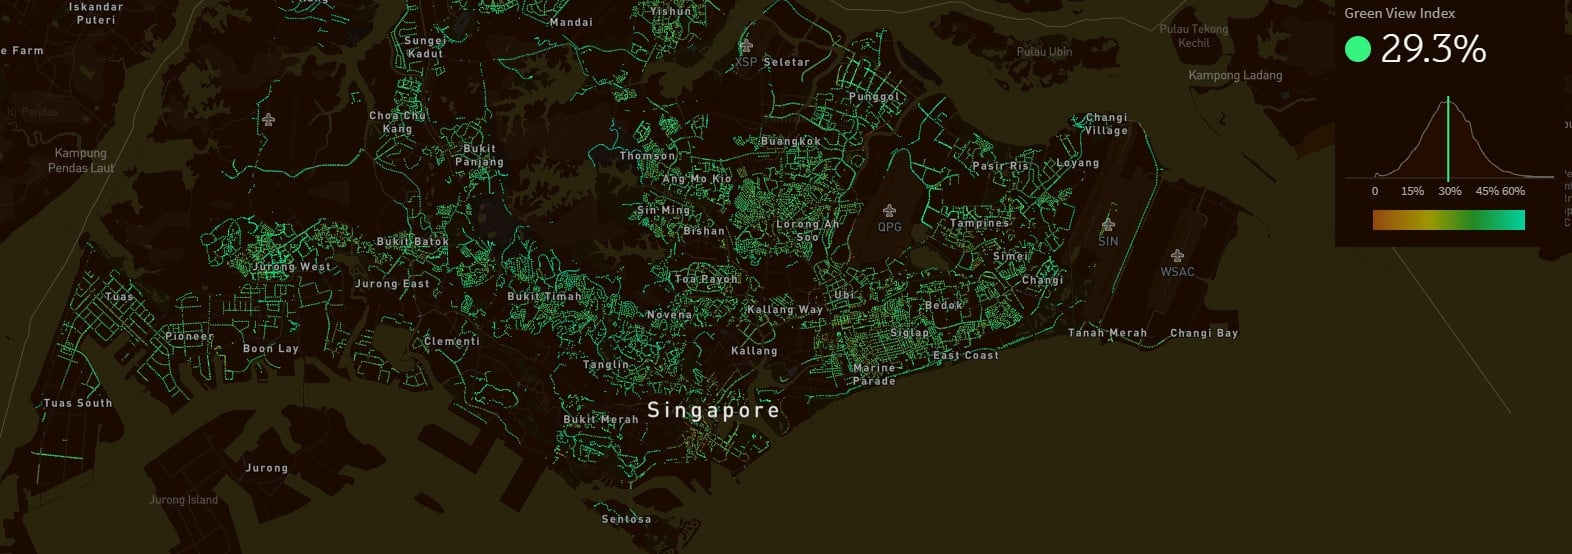 map of greebery in singapore